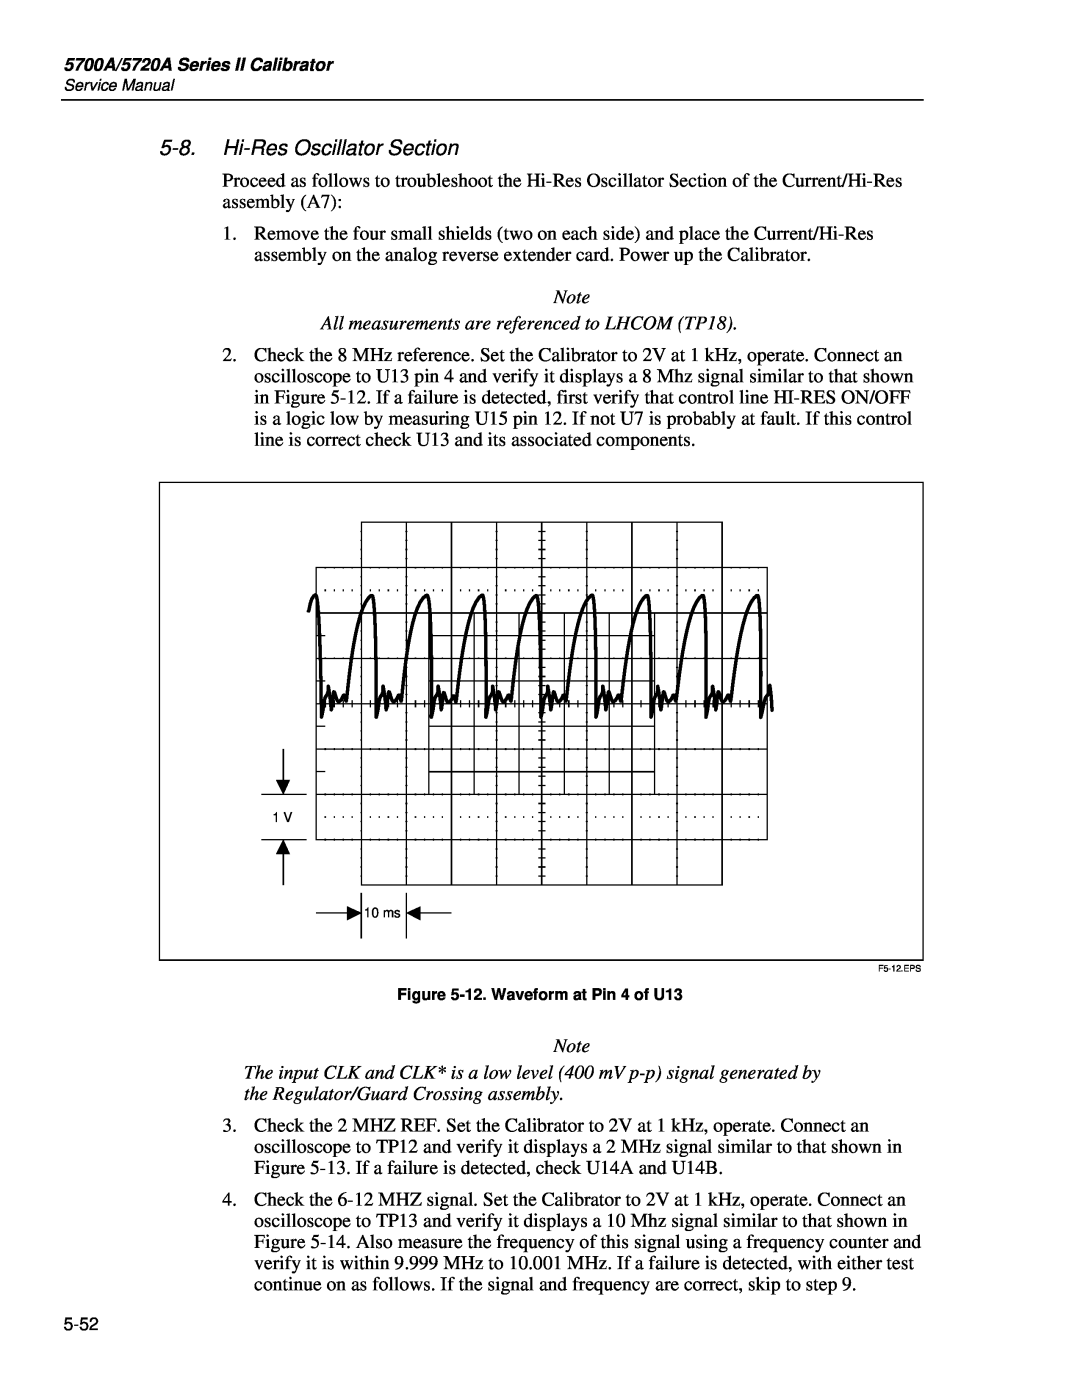 Fluke 5720A service manual Hi-Res Oscillator Section, All measurements are referenced to LHCOM TP18 